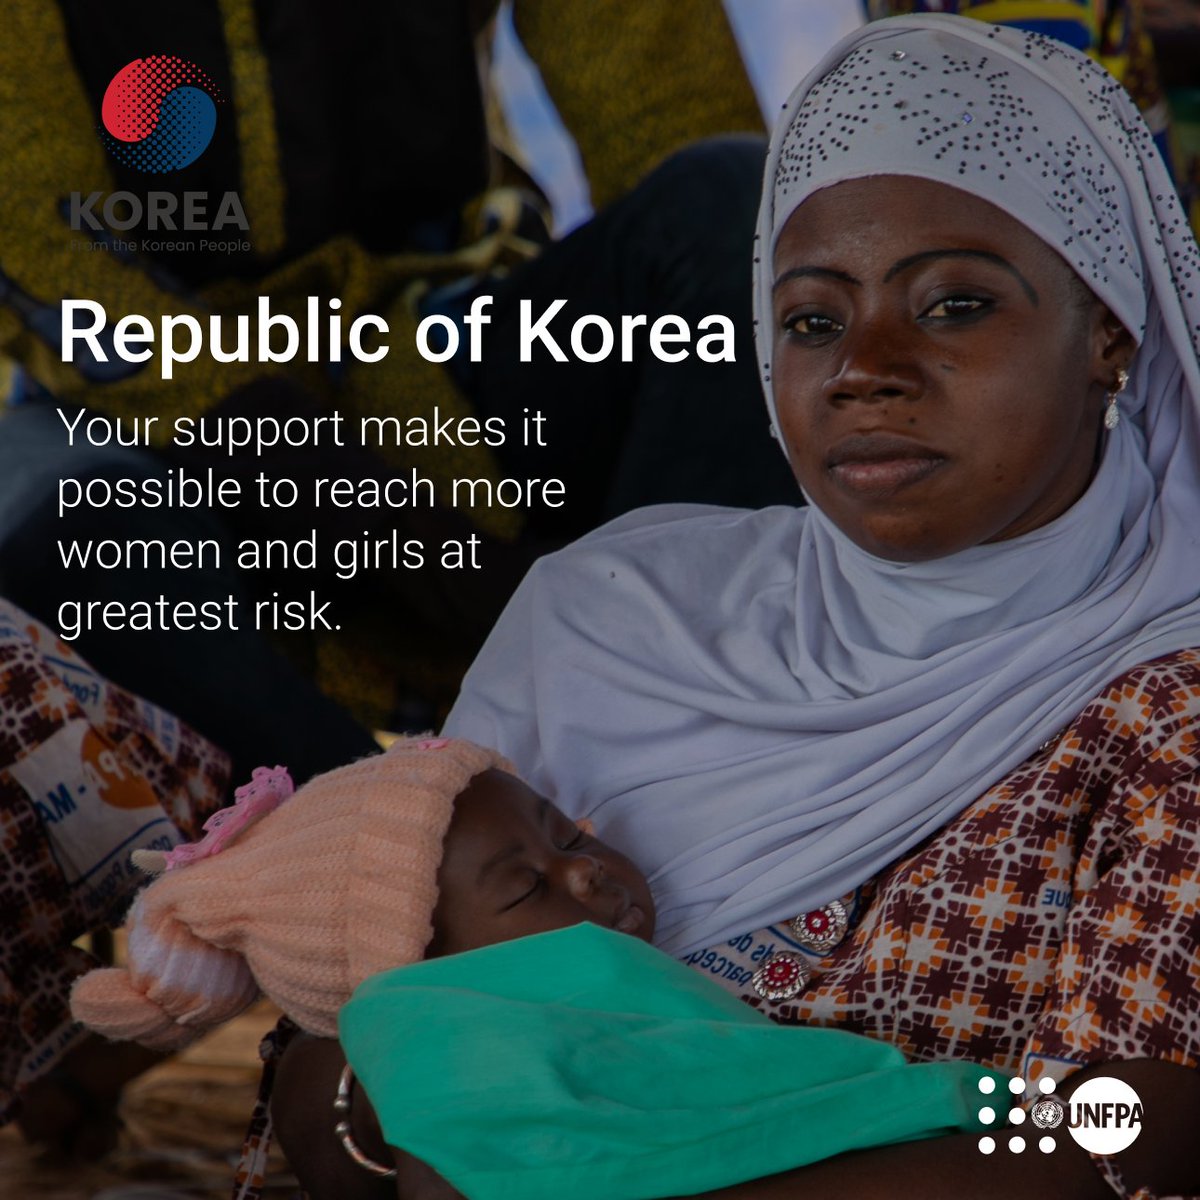 'With partners like #KOICA, @UNFPA is able to deliver lifesaving services to those in need while building a path to a more peaceful world.'—@Atayeshe See how UNFPA and the Republic of #Korea aim to meet the health needs of 700,000 women in six countries: unf.pa/rku